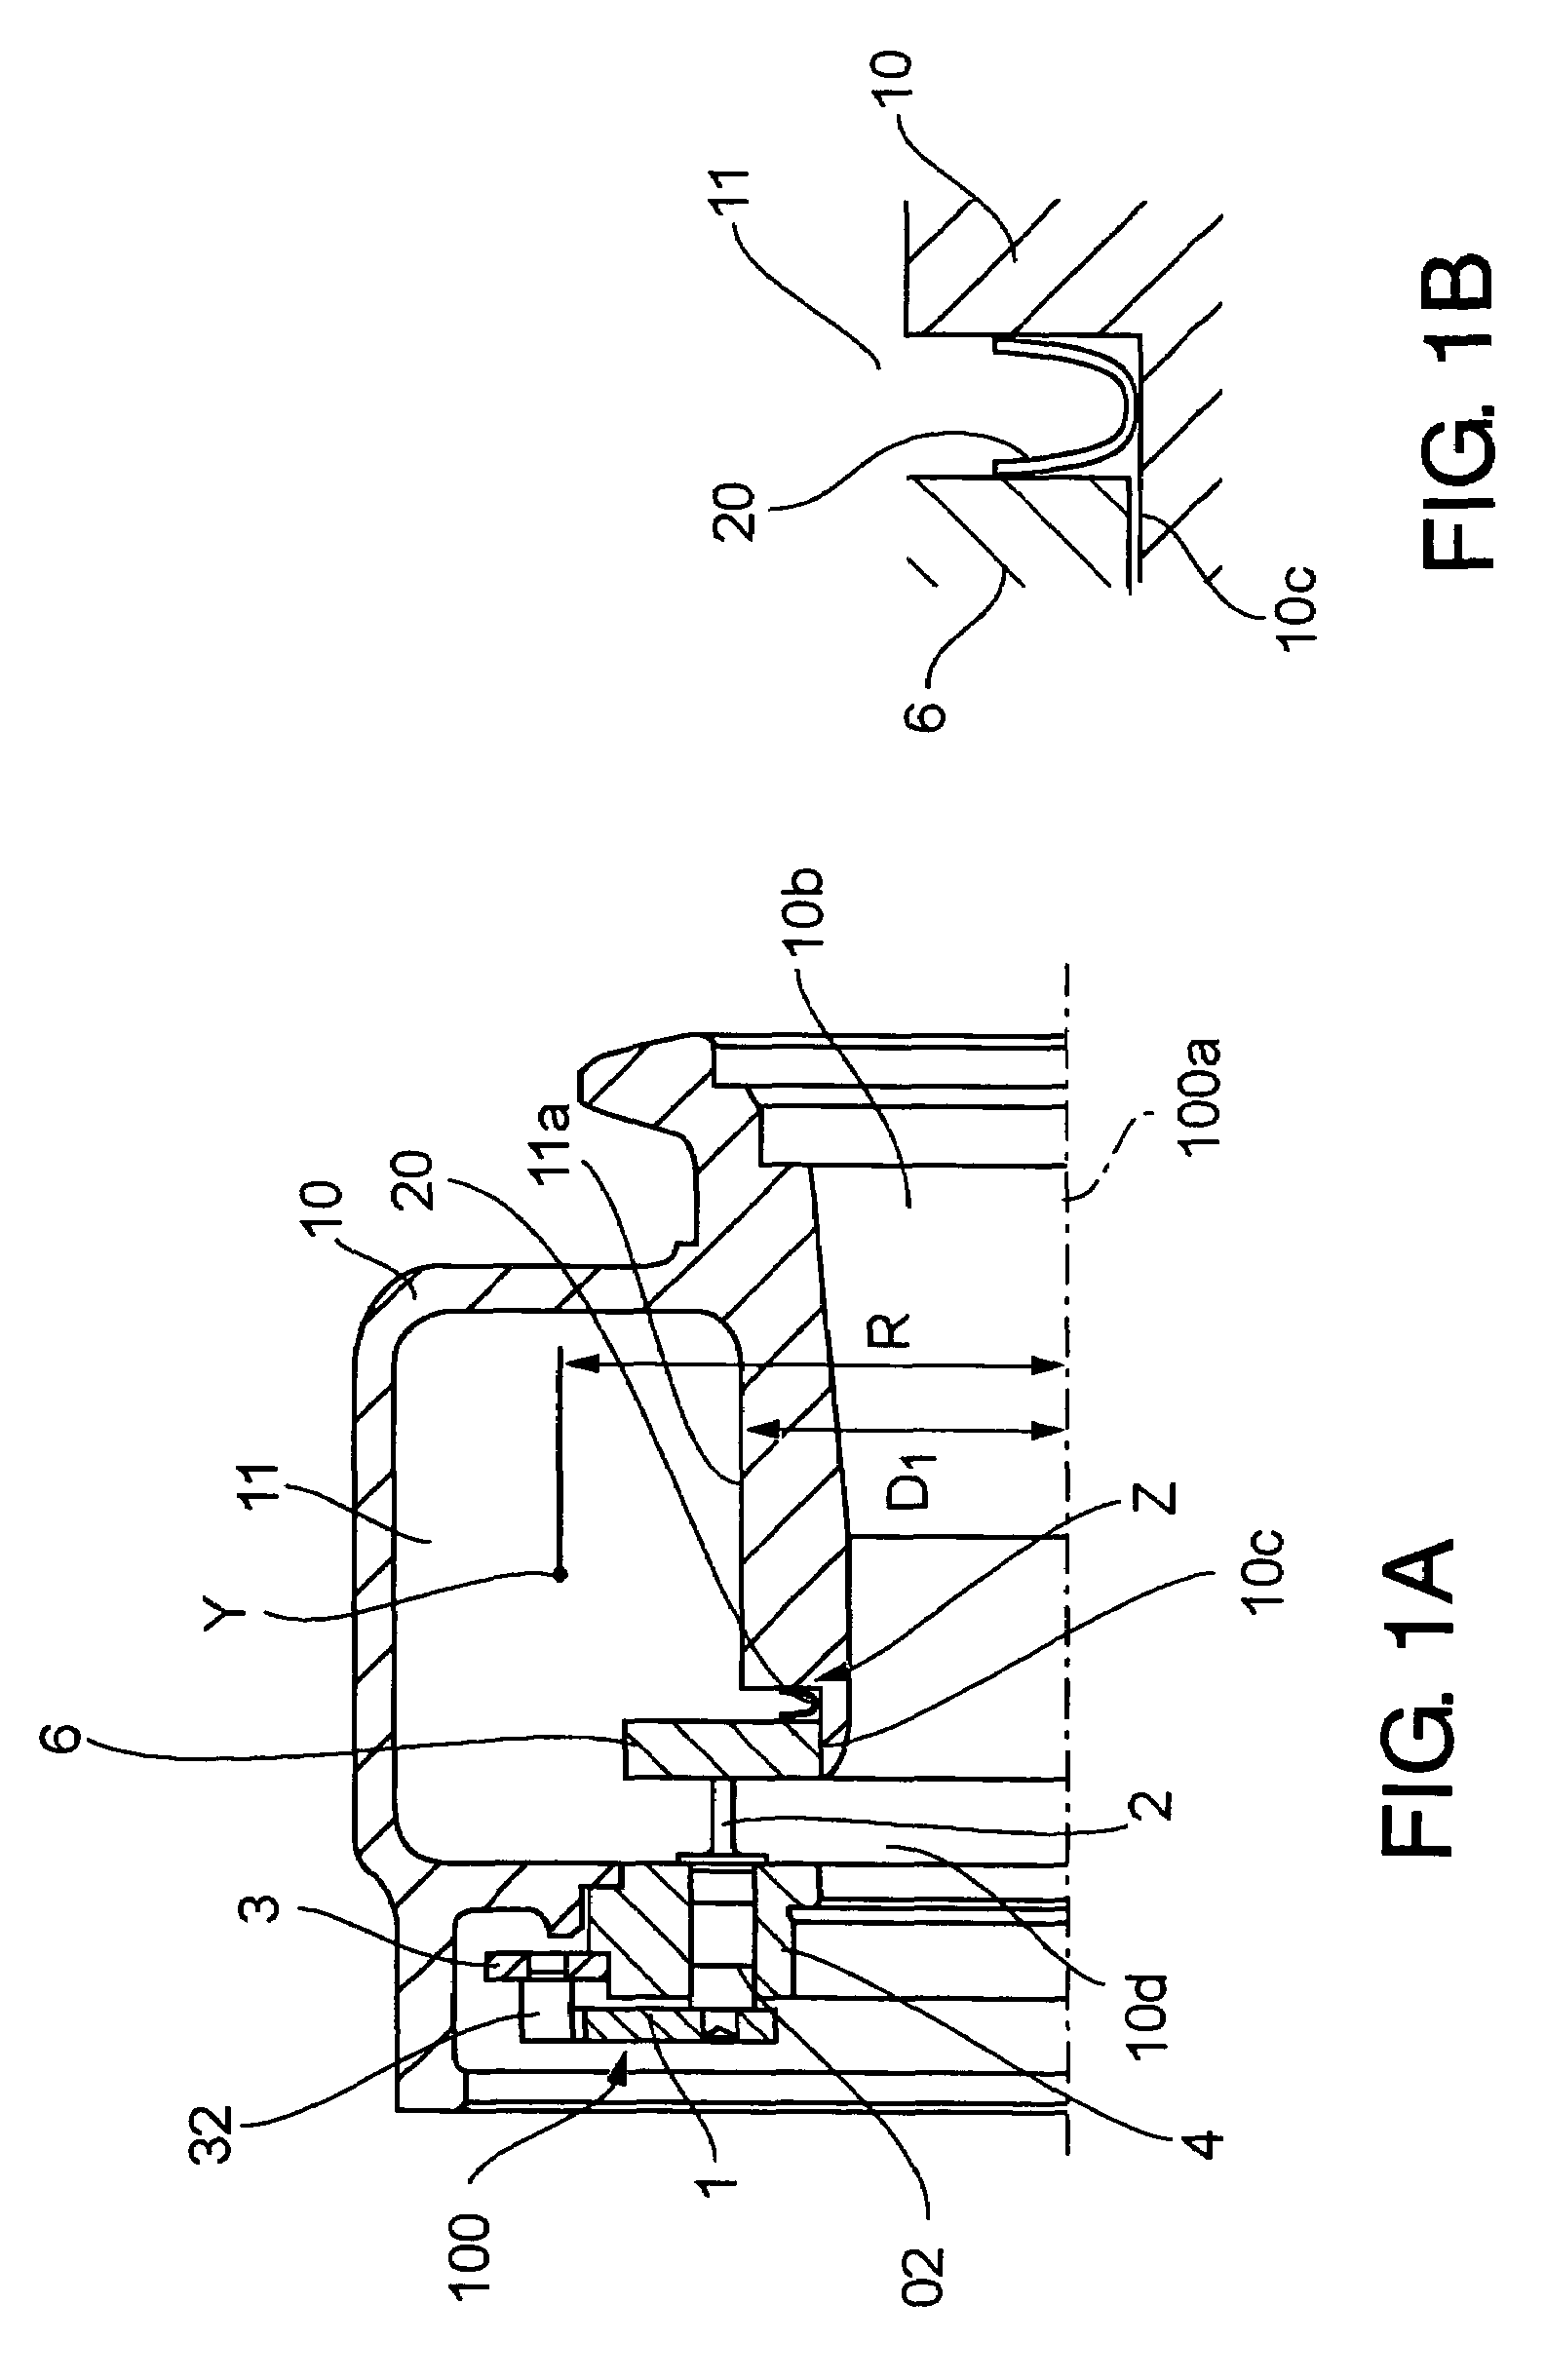 Structure of scroll of variable-throat exhaust turbocharger and method for manufacturing the turbocharger